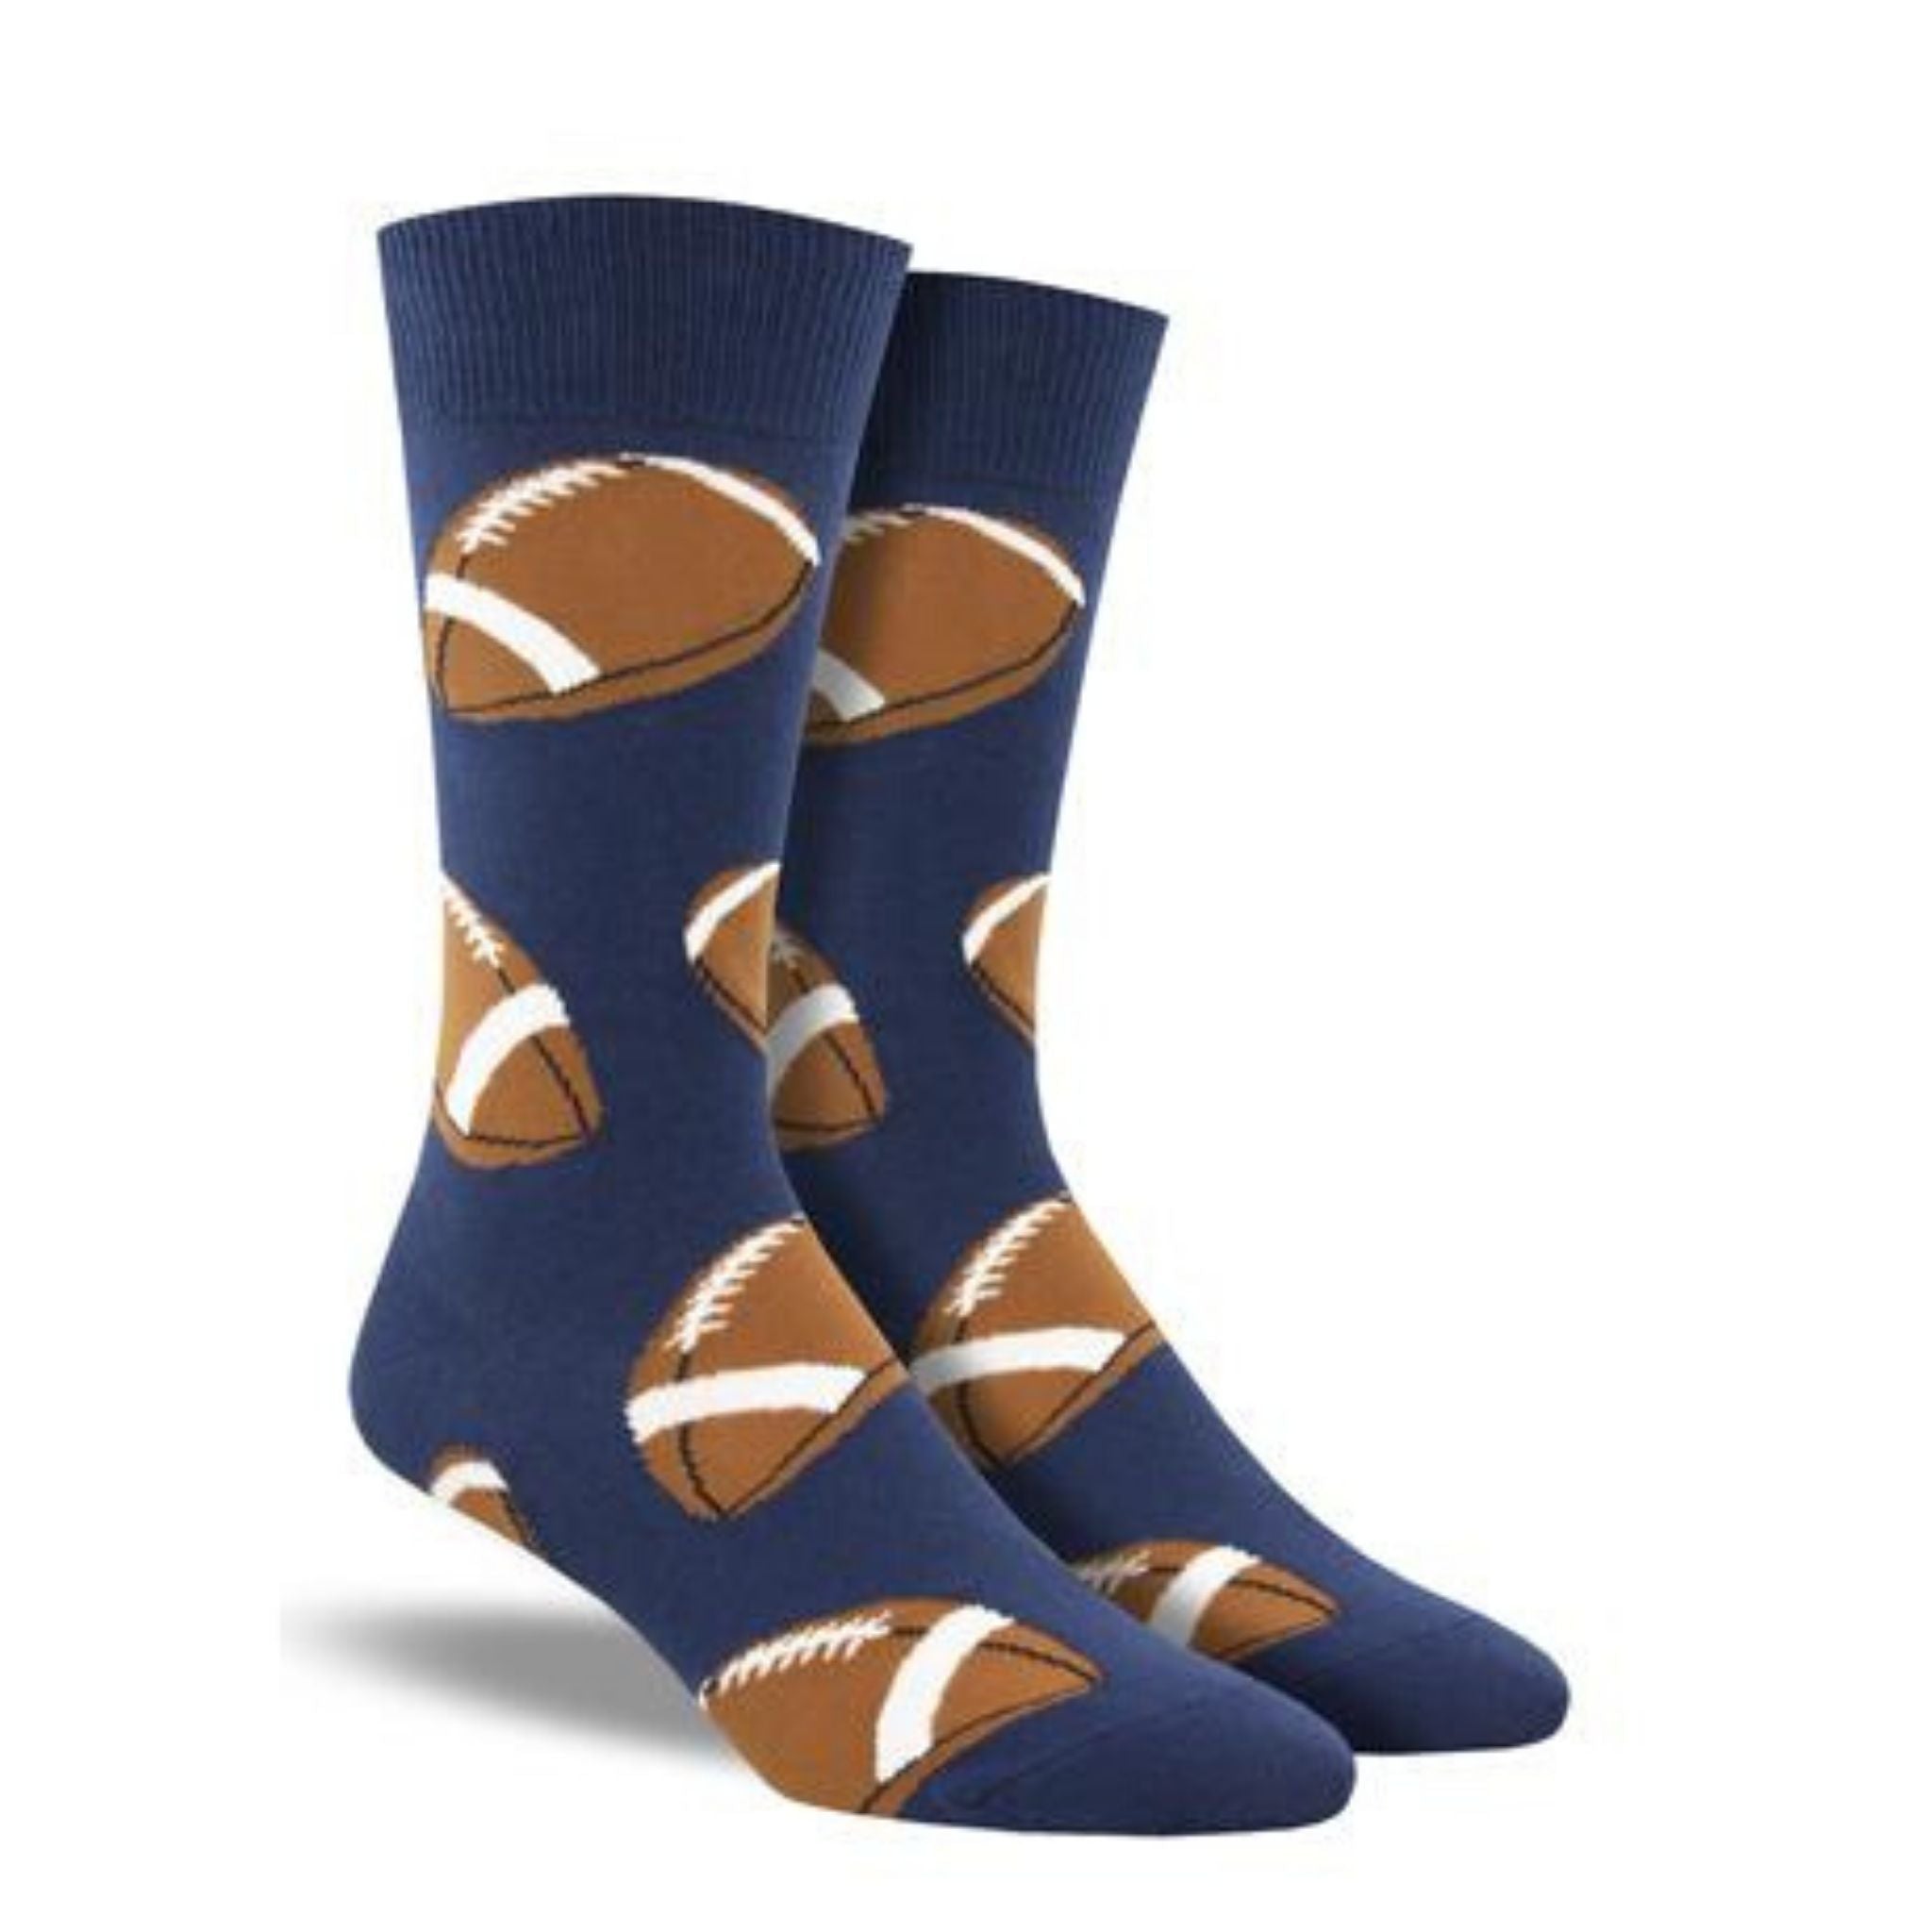 A pair of men's blue crew socks with footballs on them.